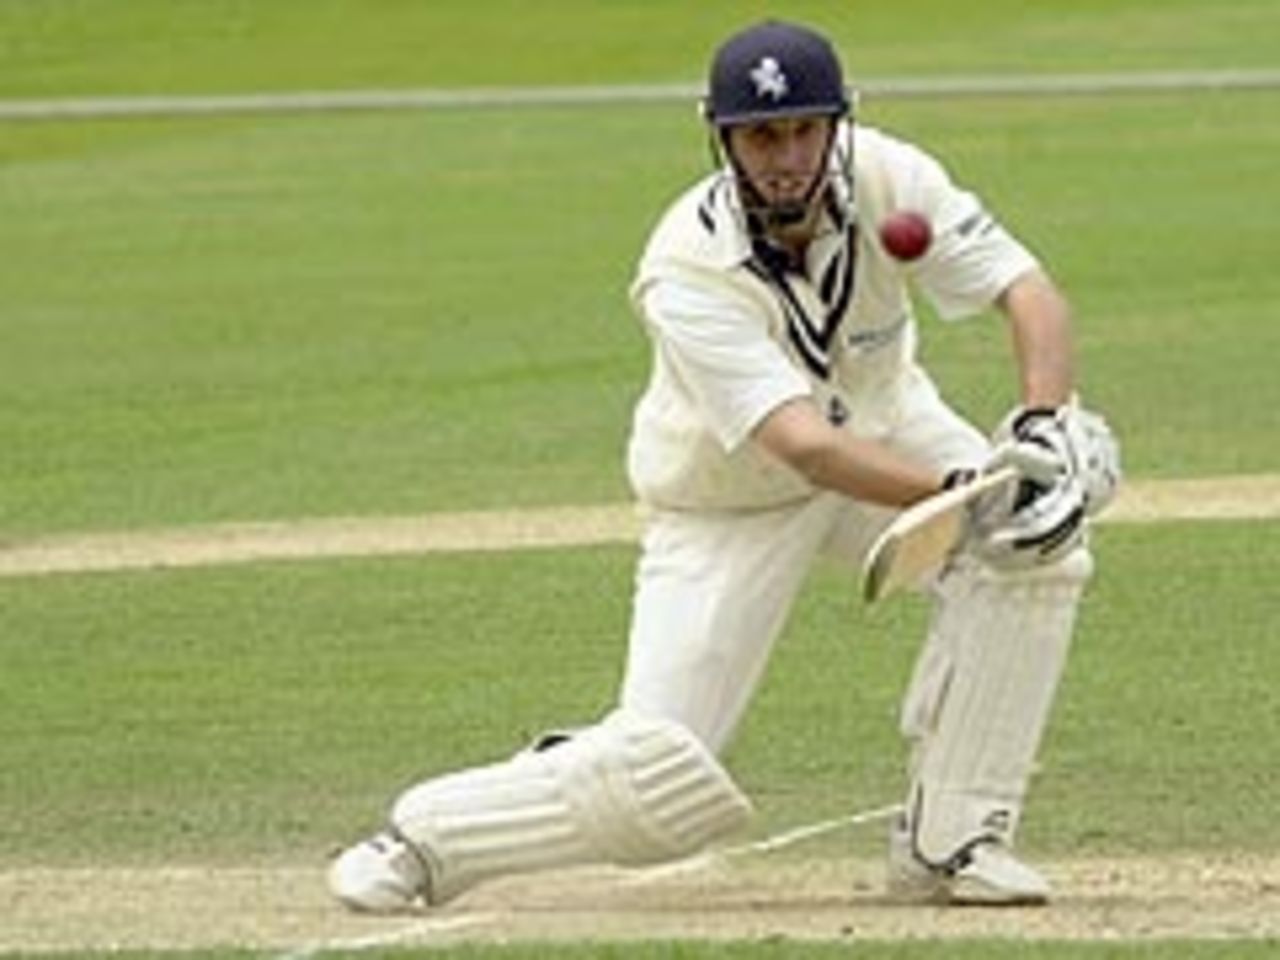 Ed Smith: 135 against Surrey to bring Kent back into their match at The Oval